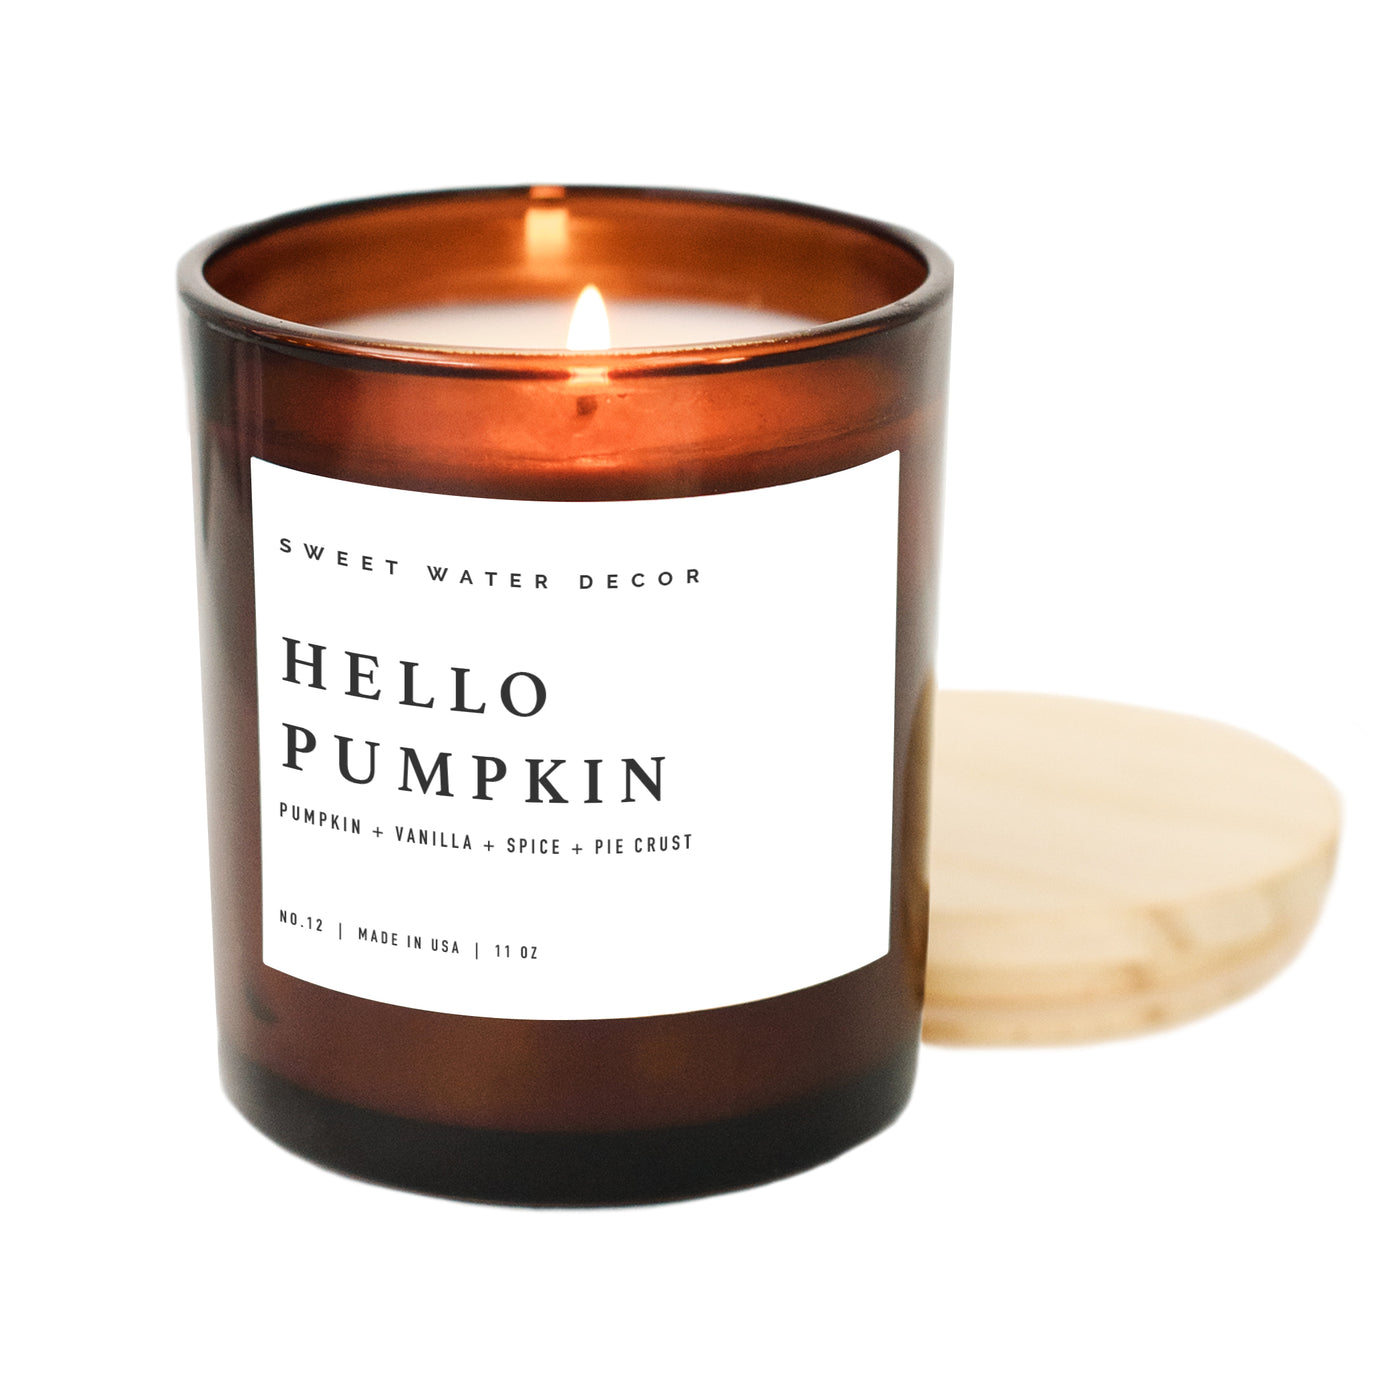 Hello Pumpkin Soy Candle - Amber Jar - 11 oz - Sweet Water Decor - Candles